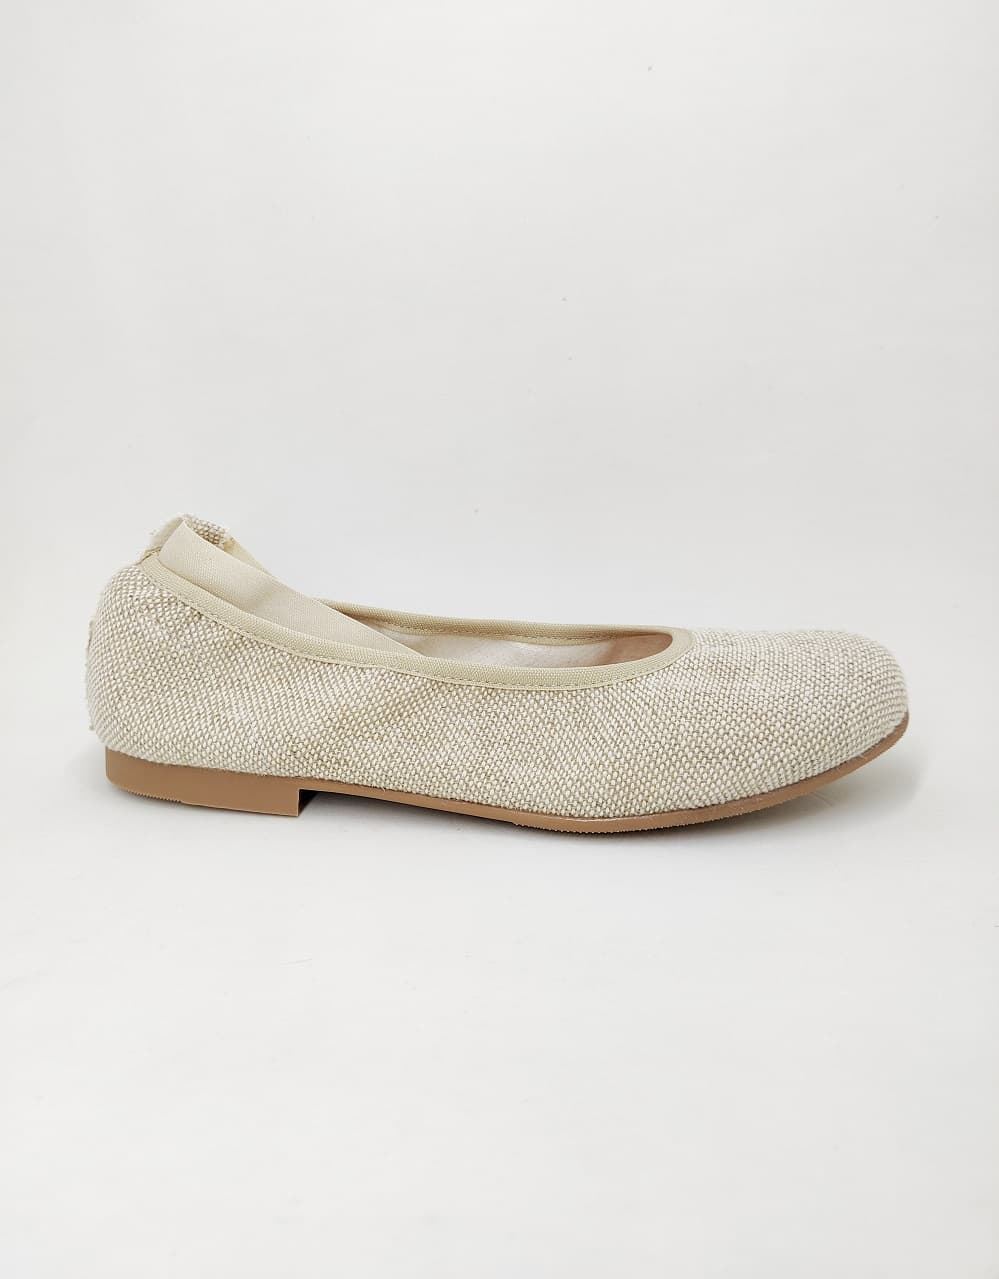 Ruth Secret Ballerinas in Rustic Linen with ribbons - Image 1